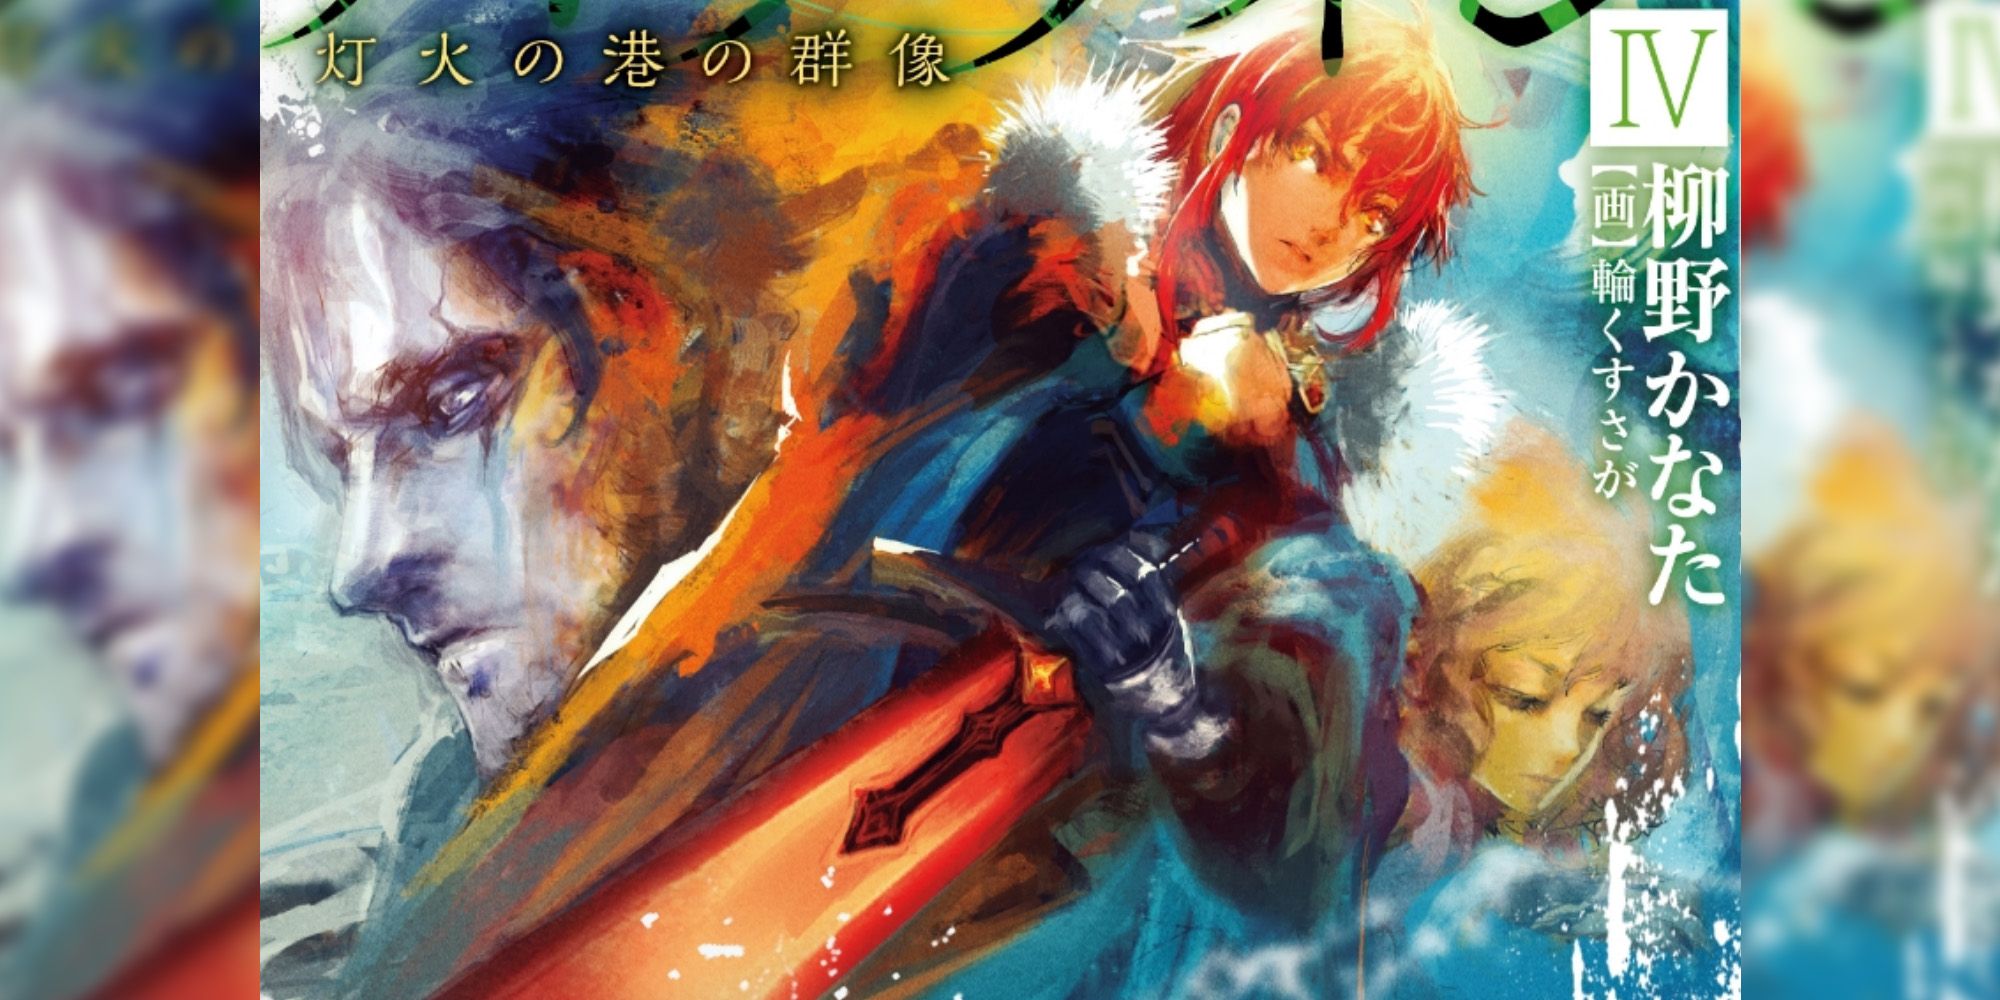 10 Best Light Novels To Read If You Like Frieren Beyond Journey’s End The Faraway Paladin 3 (1)